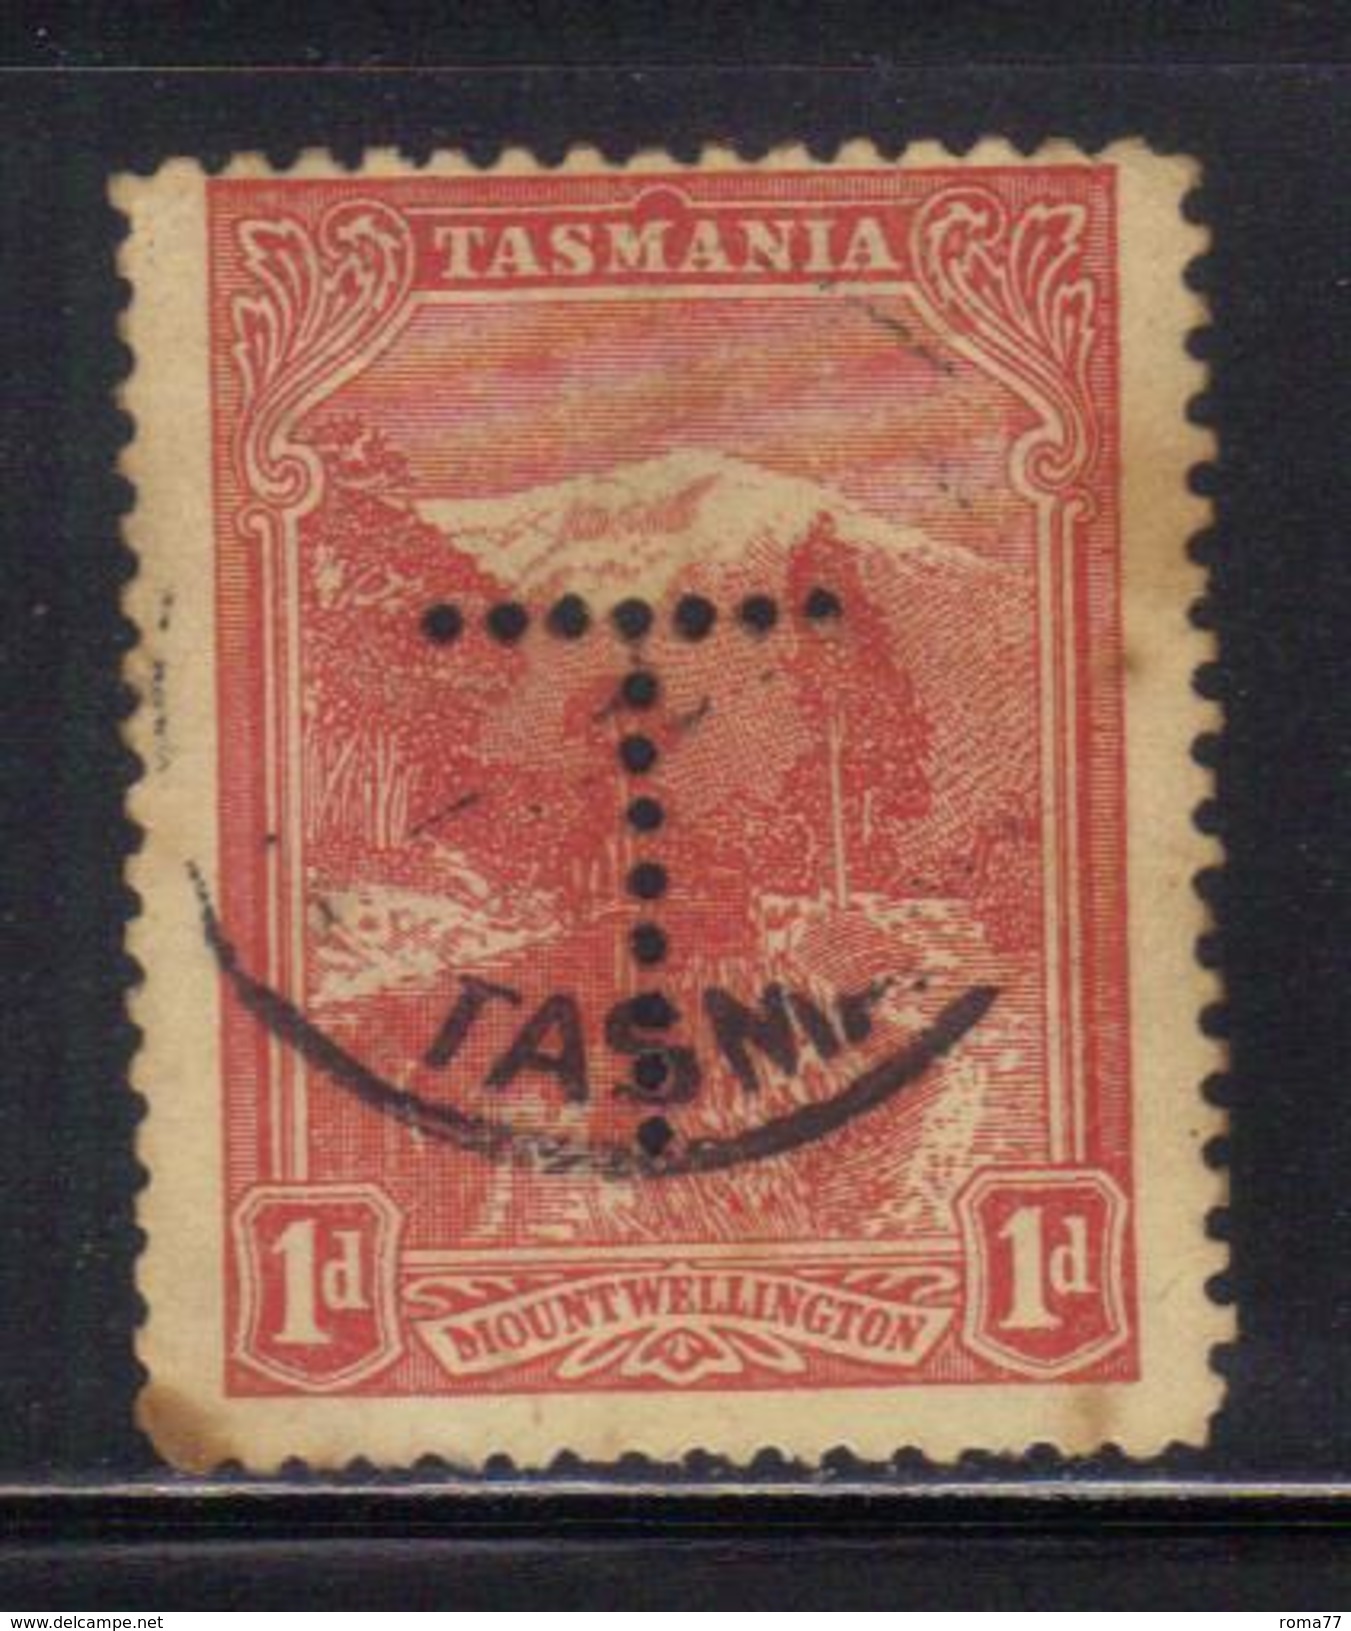 T1923 - TASMANIA 1 Penny Official :  Wmk  V Over Crown  Used . Punctured T - Gebraucht